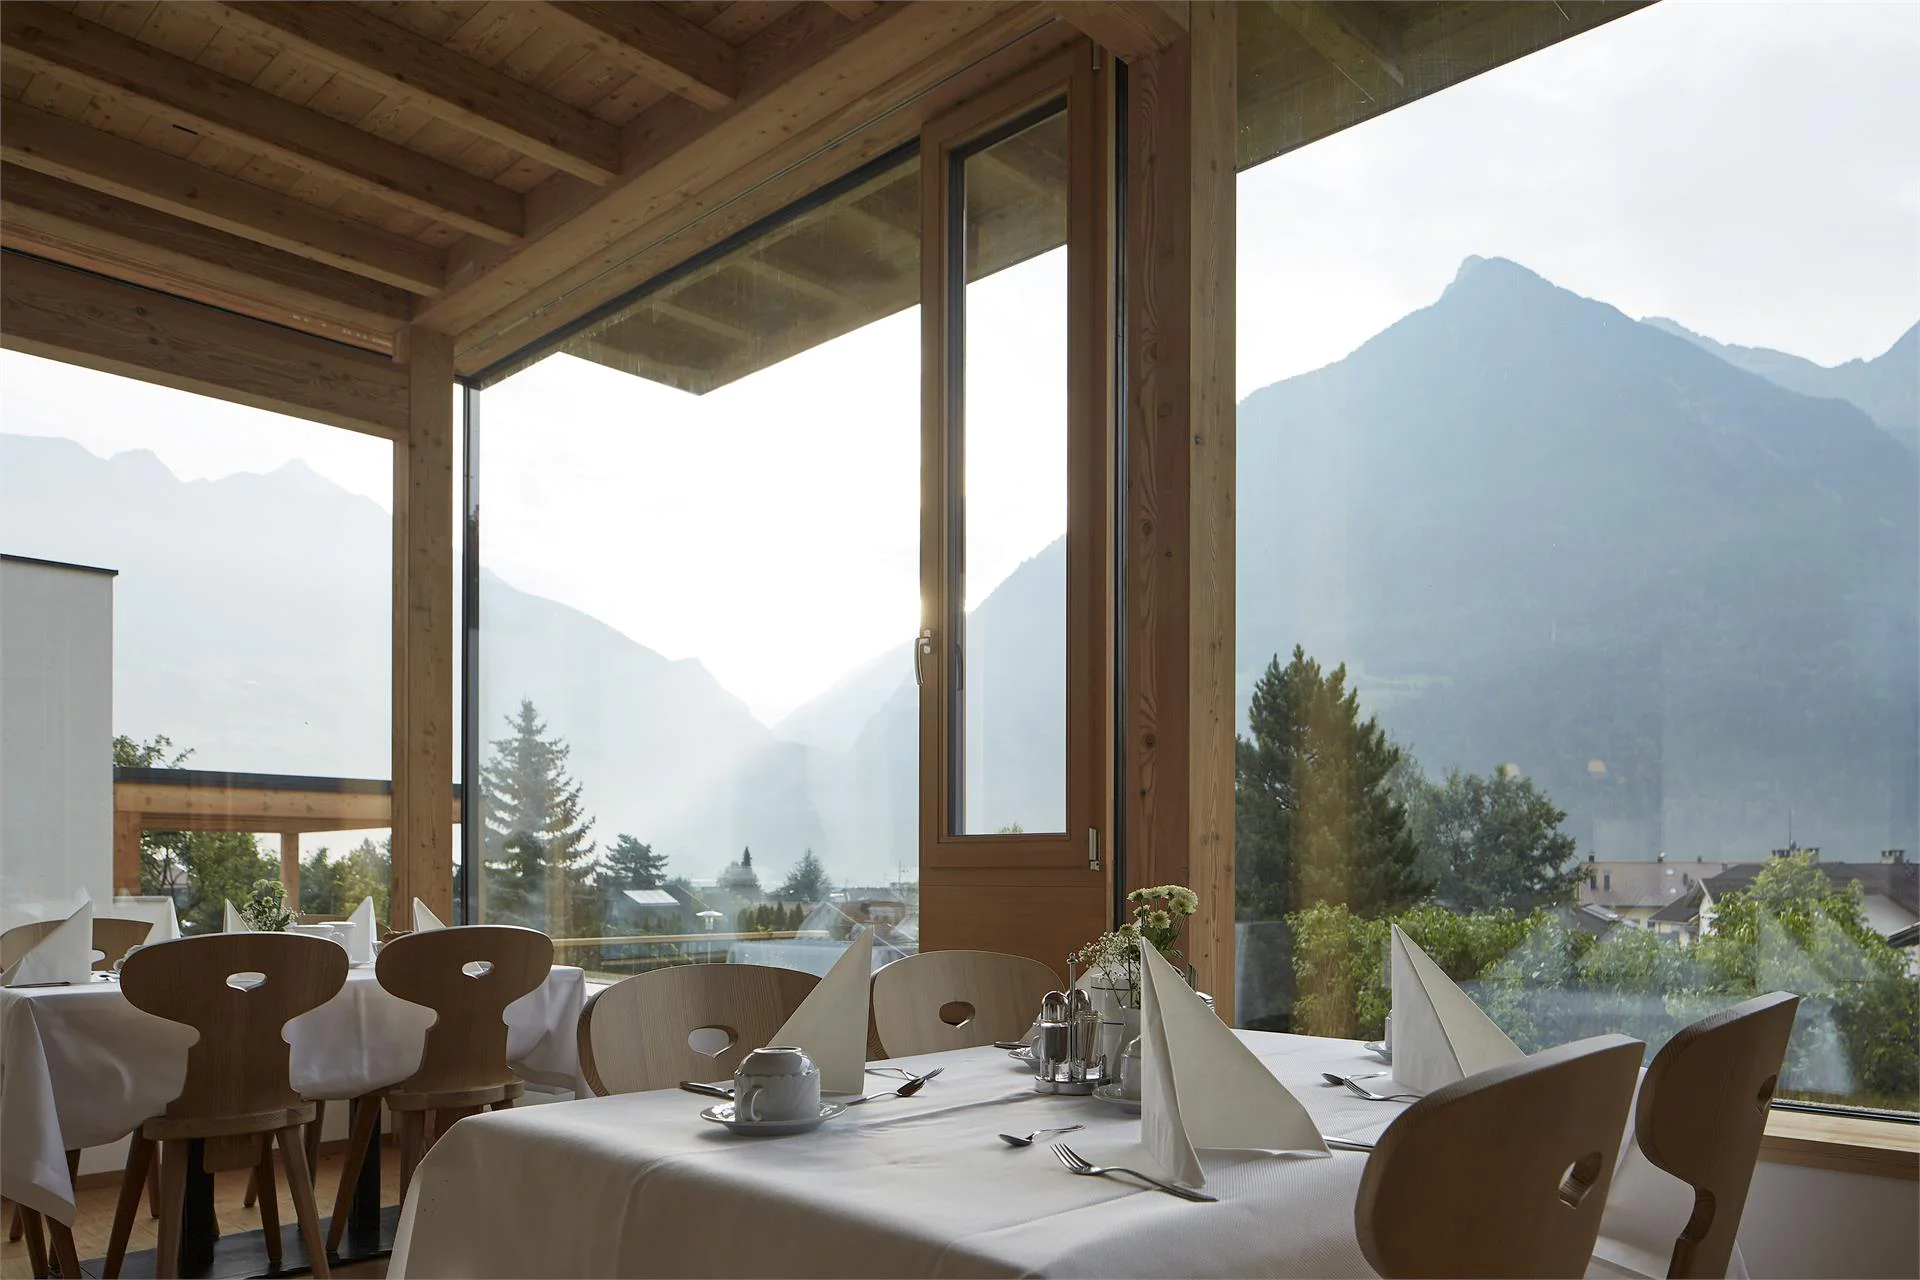 Hotel Taufers Campo Tures 7 suedtirol.info